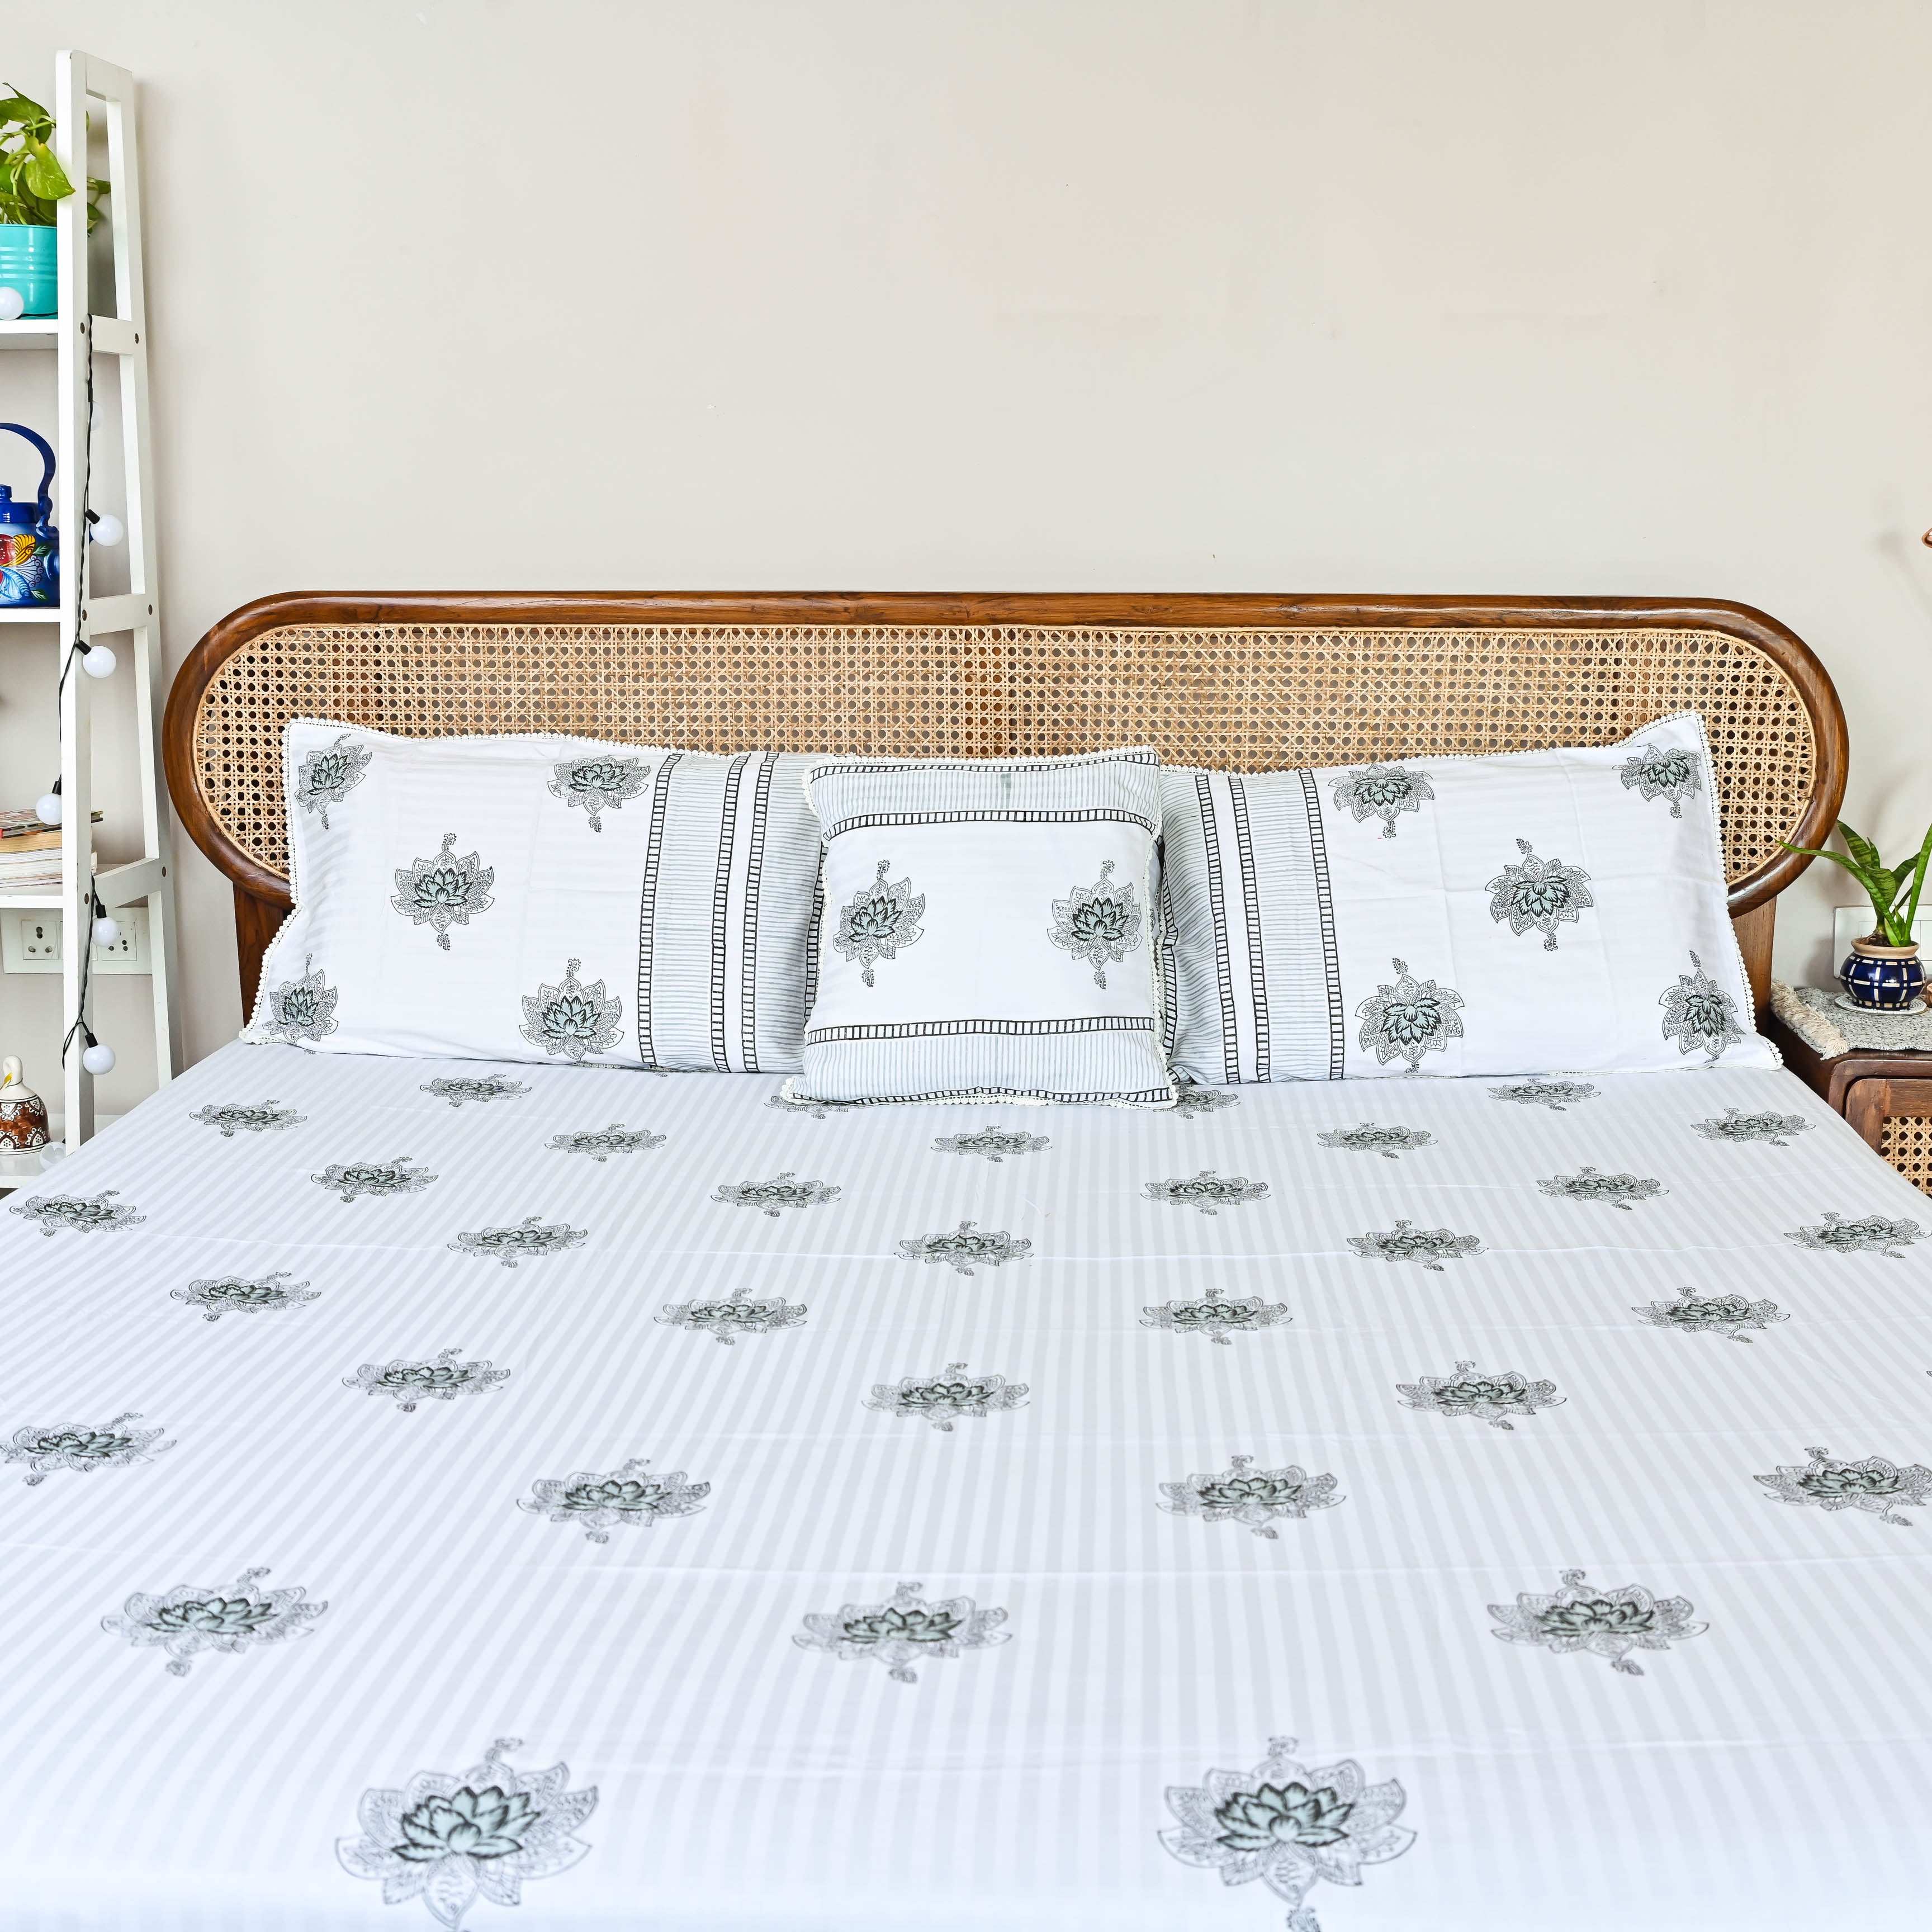 Black and White Handblock Printed Bedsheet with Pillow and cushion covers